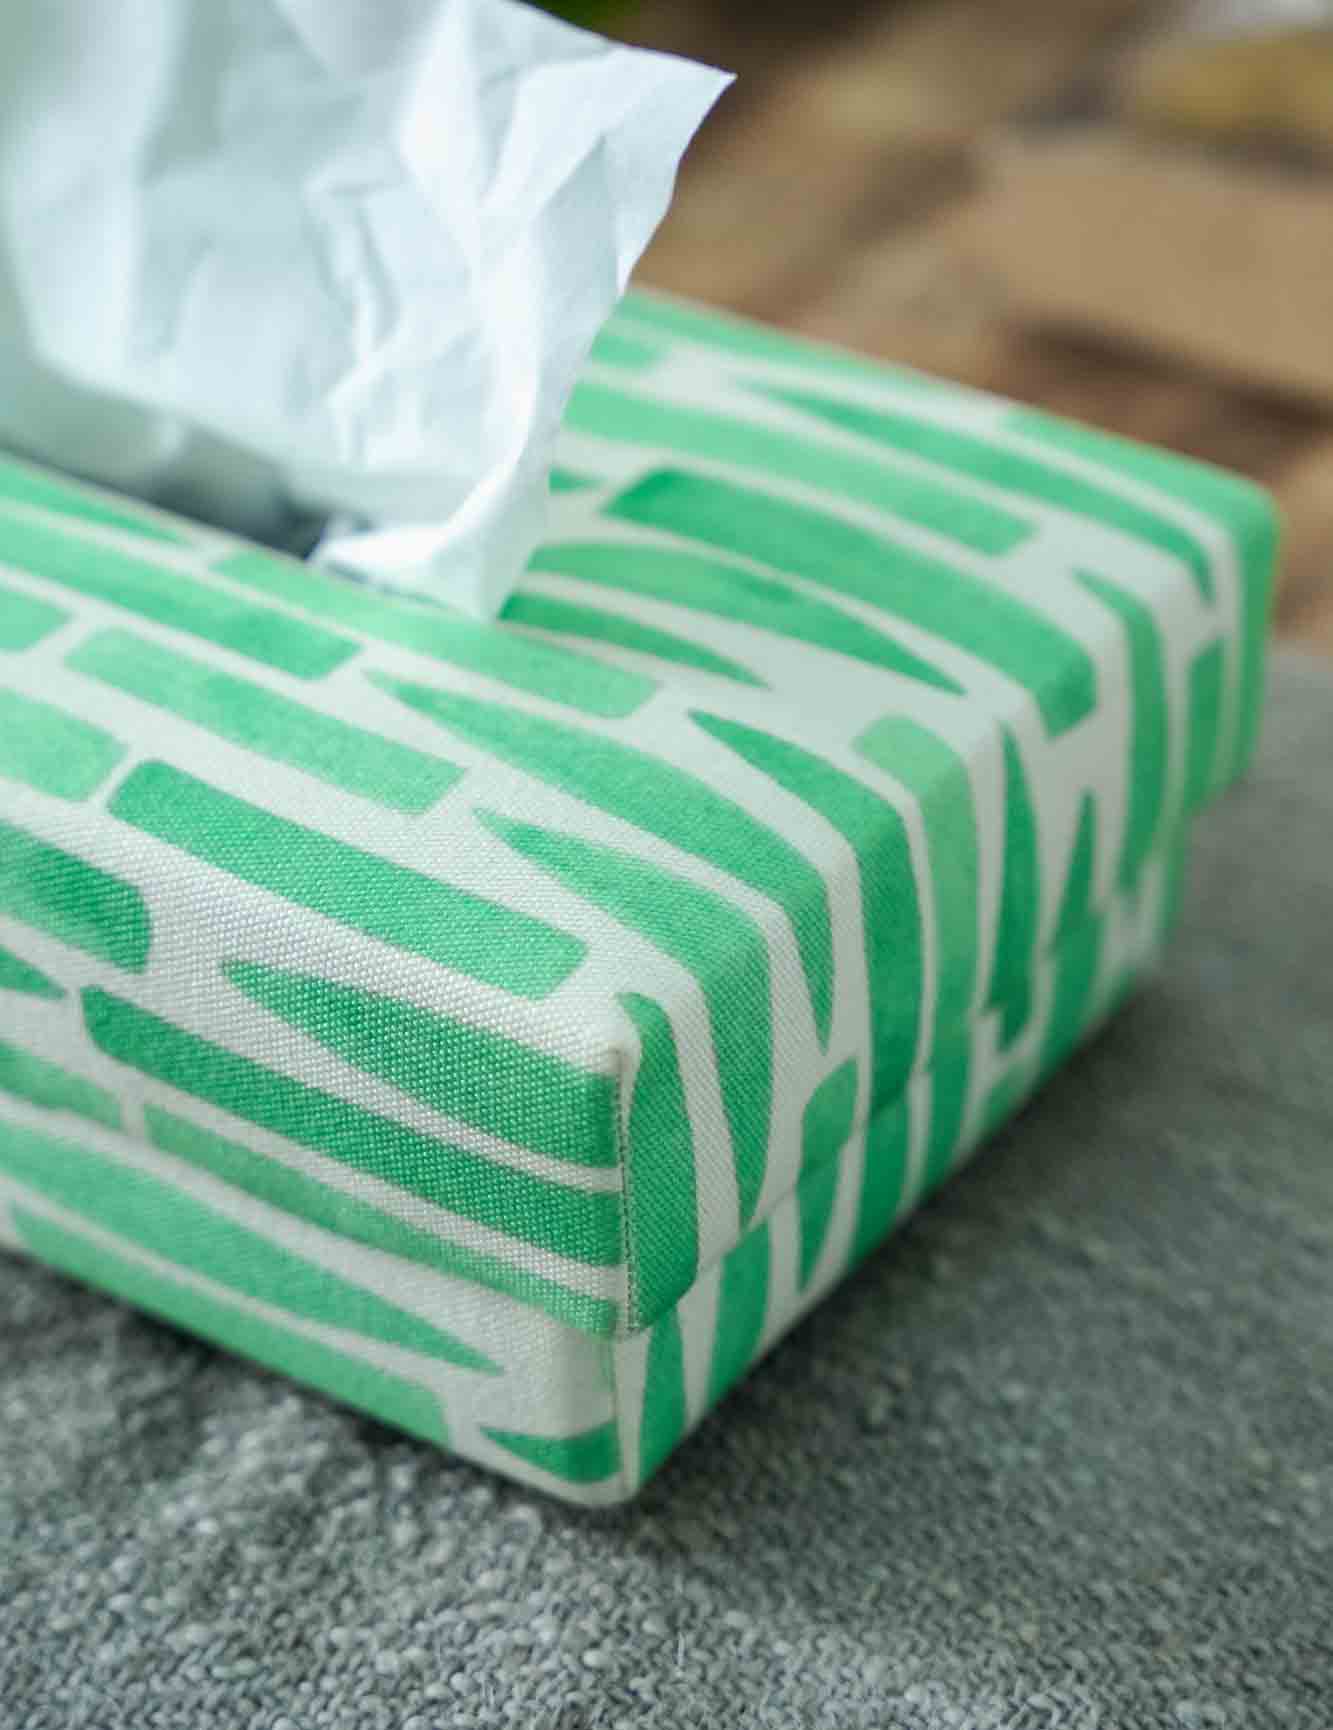 Serenity in Green: Patterned Tissue Box